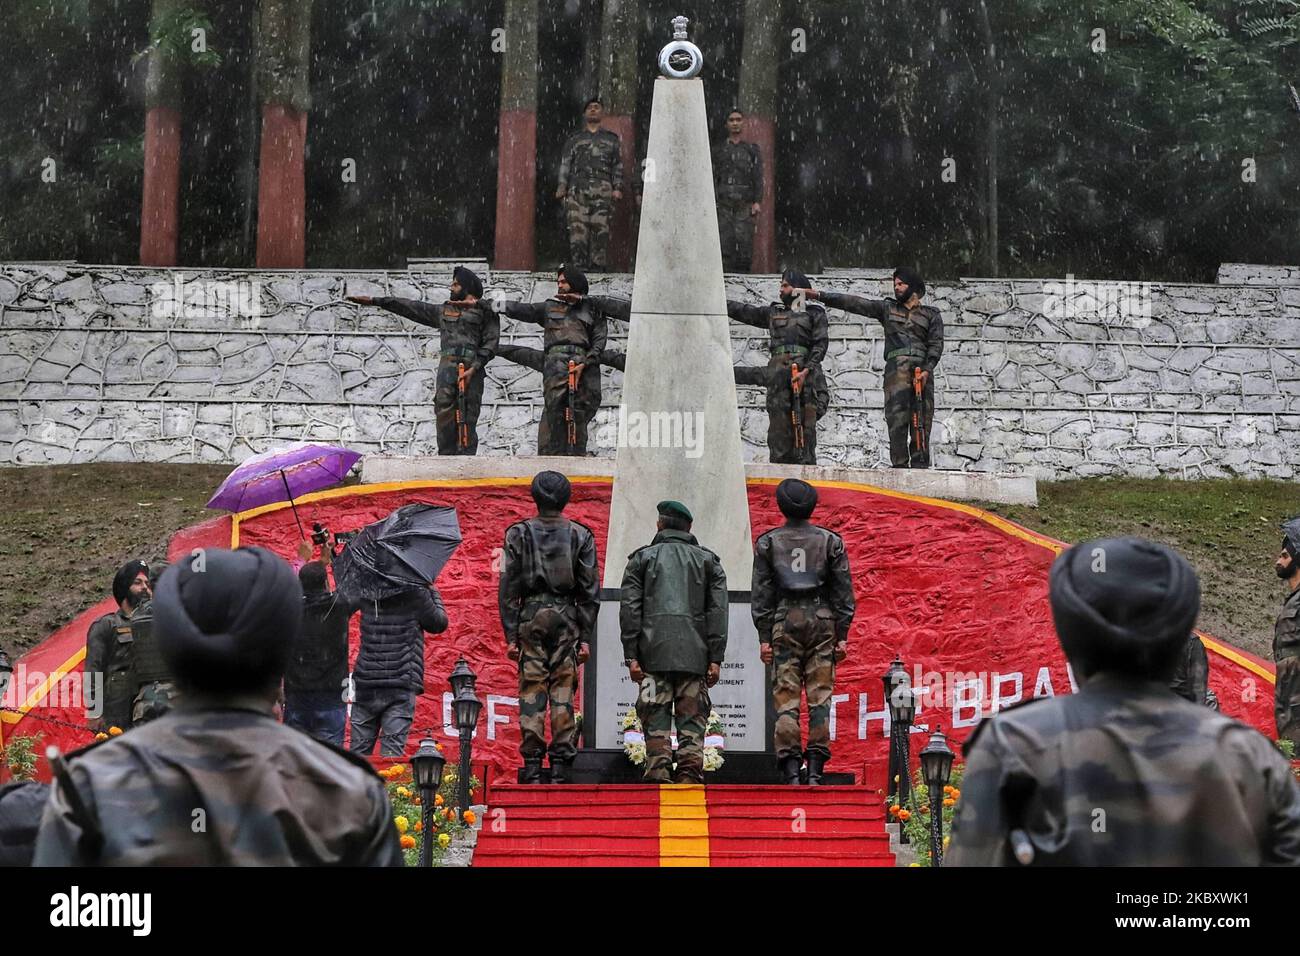 Indian army pays rich tributes to the Martyrs of Haji Pir Pass on the 50th anniversary of its ''victory'' over Pakistan in the 1965 war with a series of events in Baramulla, Jammu and Kashmir, India on 31 August 2020. GOC 19 Infantry Div Major General Virendra Vats was present on the occasion who highlighted the role of local populace during the battle of Haji Pir. The indian army while praying tribute to martyrs also paid tribute to Mohammad Maqbool Shervani (a Kashmiri youth and National Conference member, who delayed the march of Pakhtoon tribesmen from Pakistan and rebel forces in Baramull Stock Photo